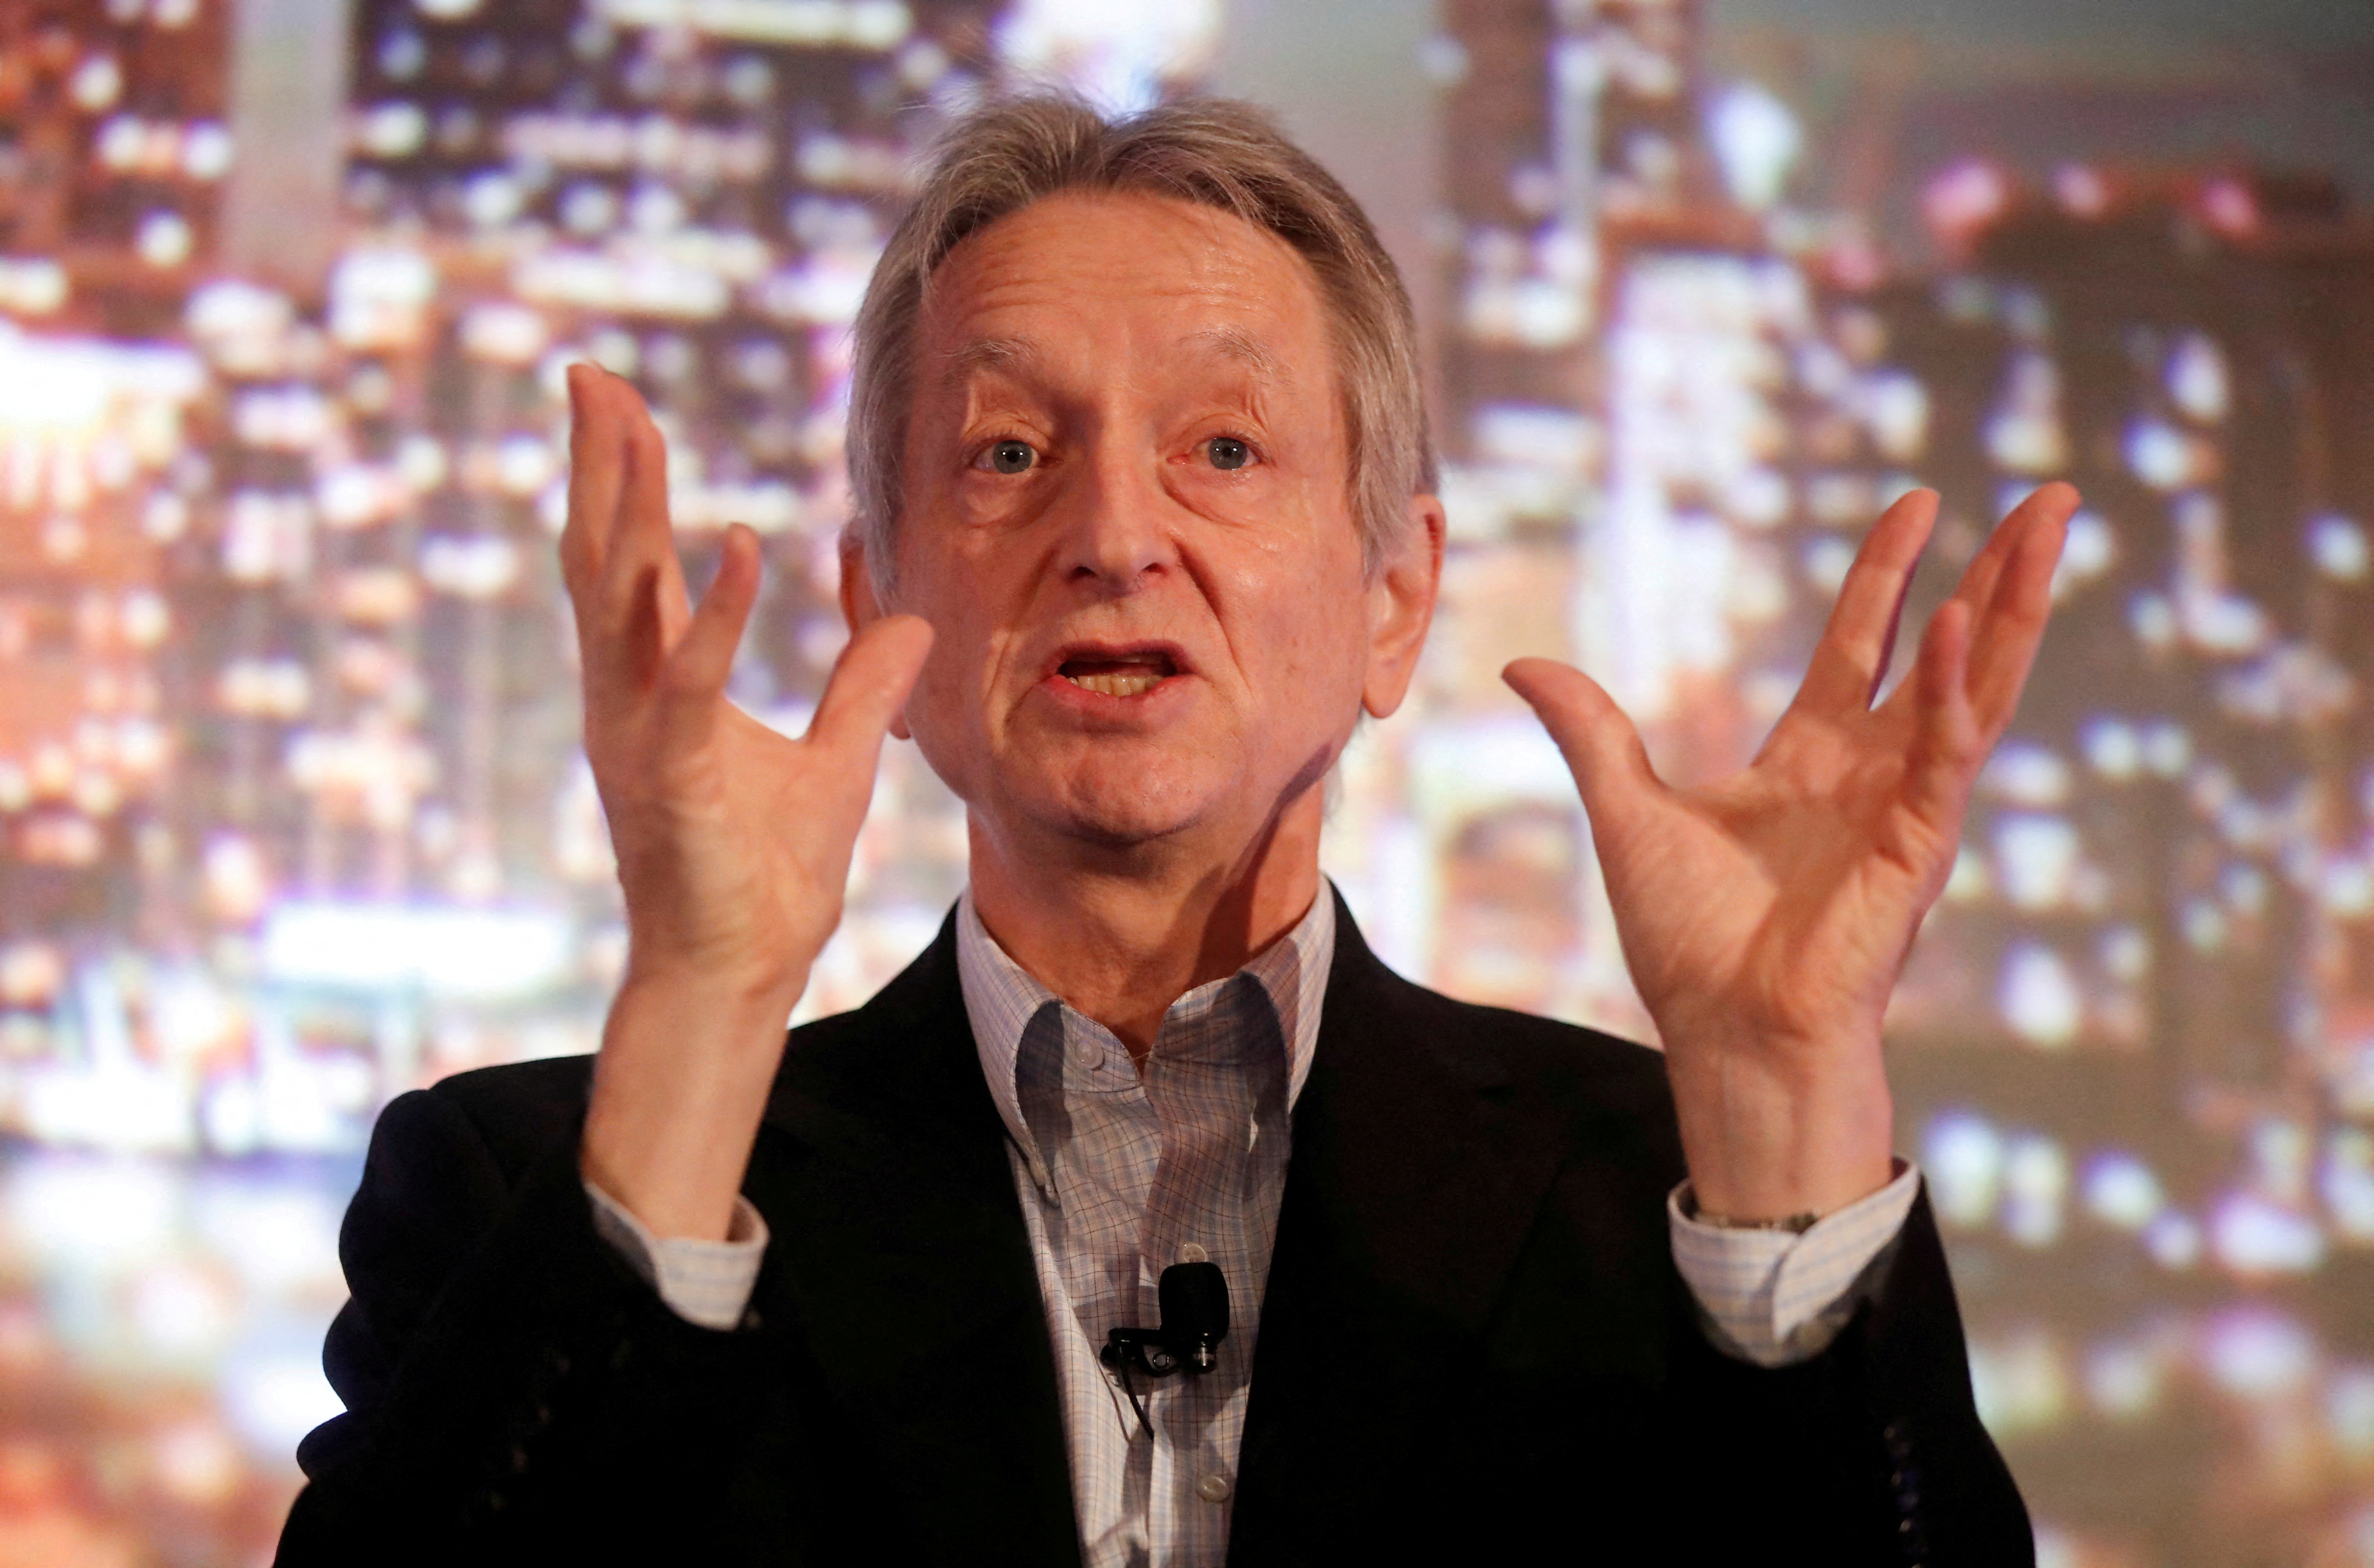 Artificial intelligence pioneer Geoffrey Hinton speaks at the Thomson Reuters Financial and Risk Summit in Toronto